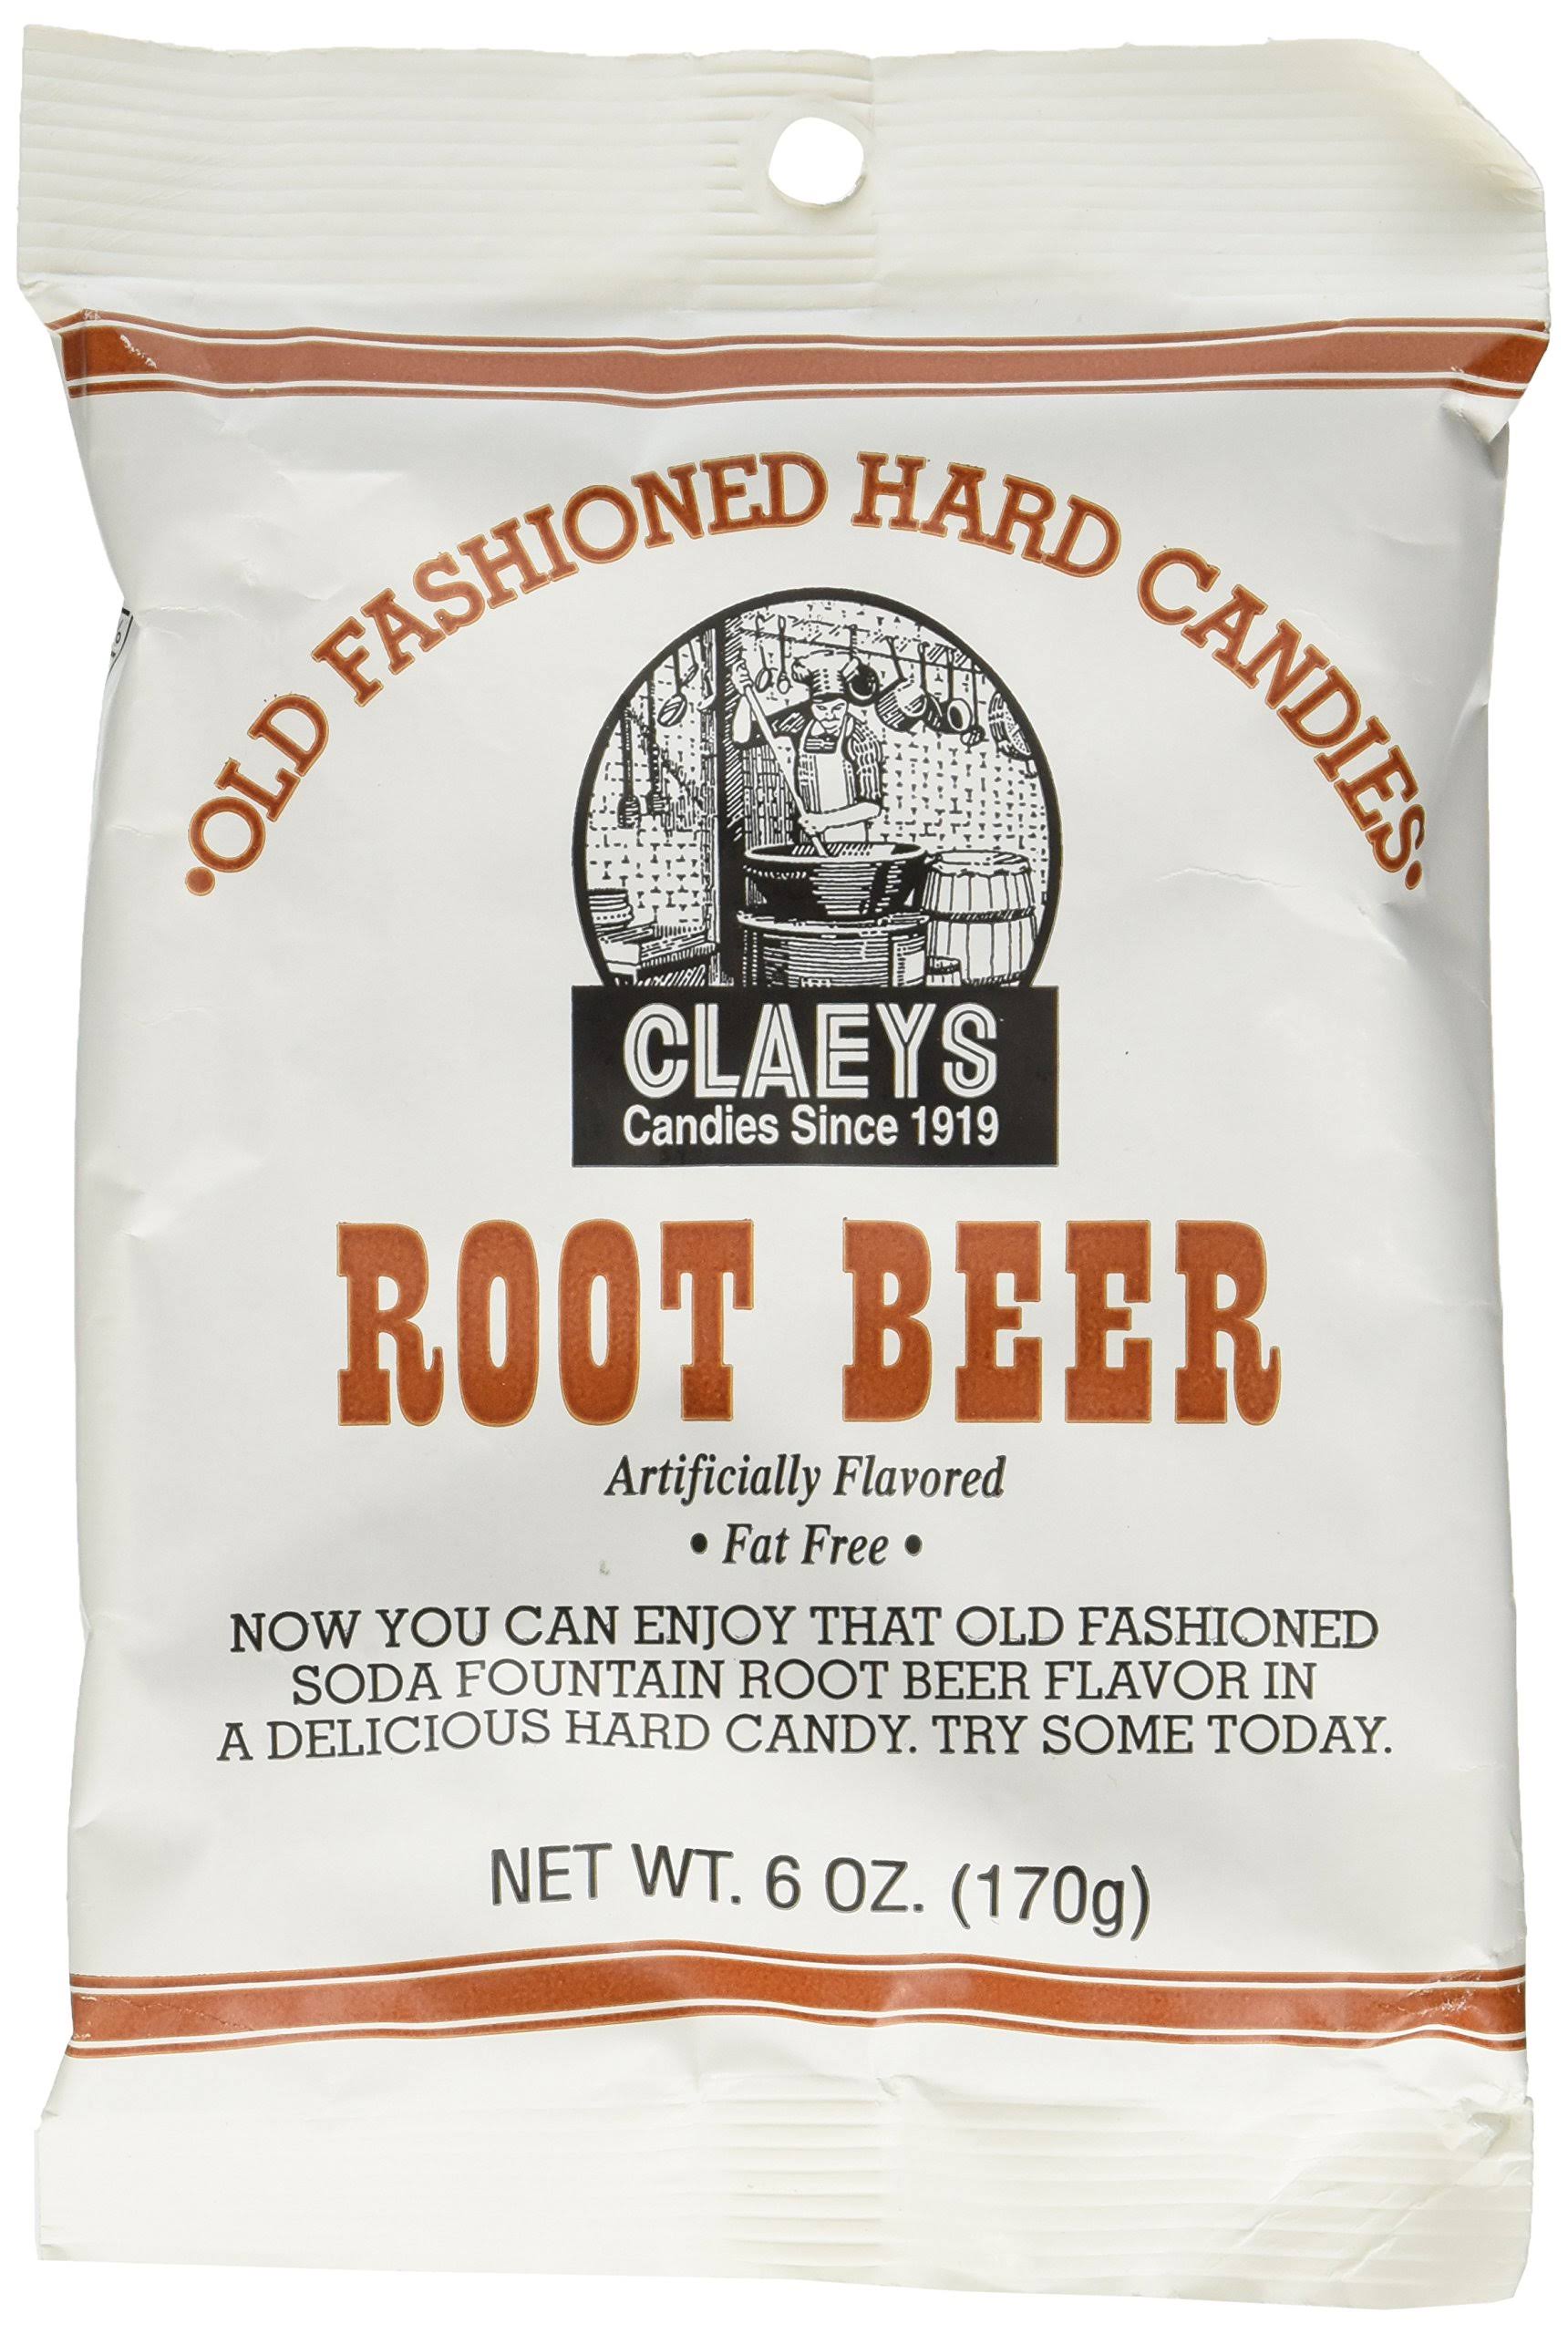 Claeys Old Fashioned Hard Candies - Root Beer Flavored